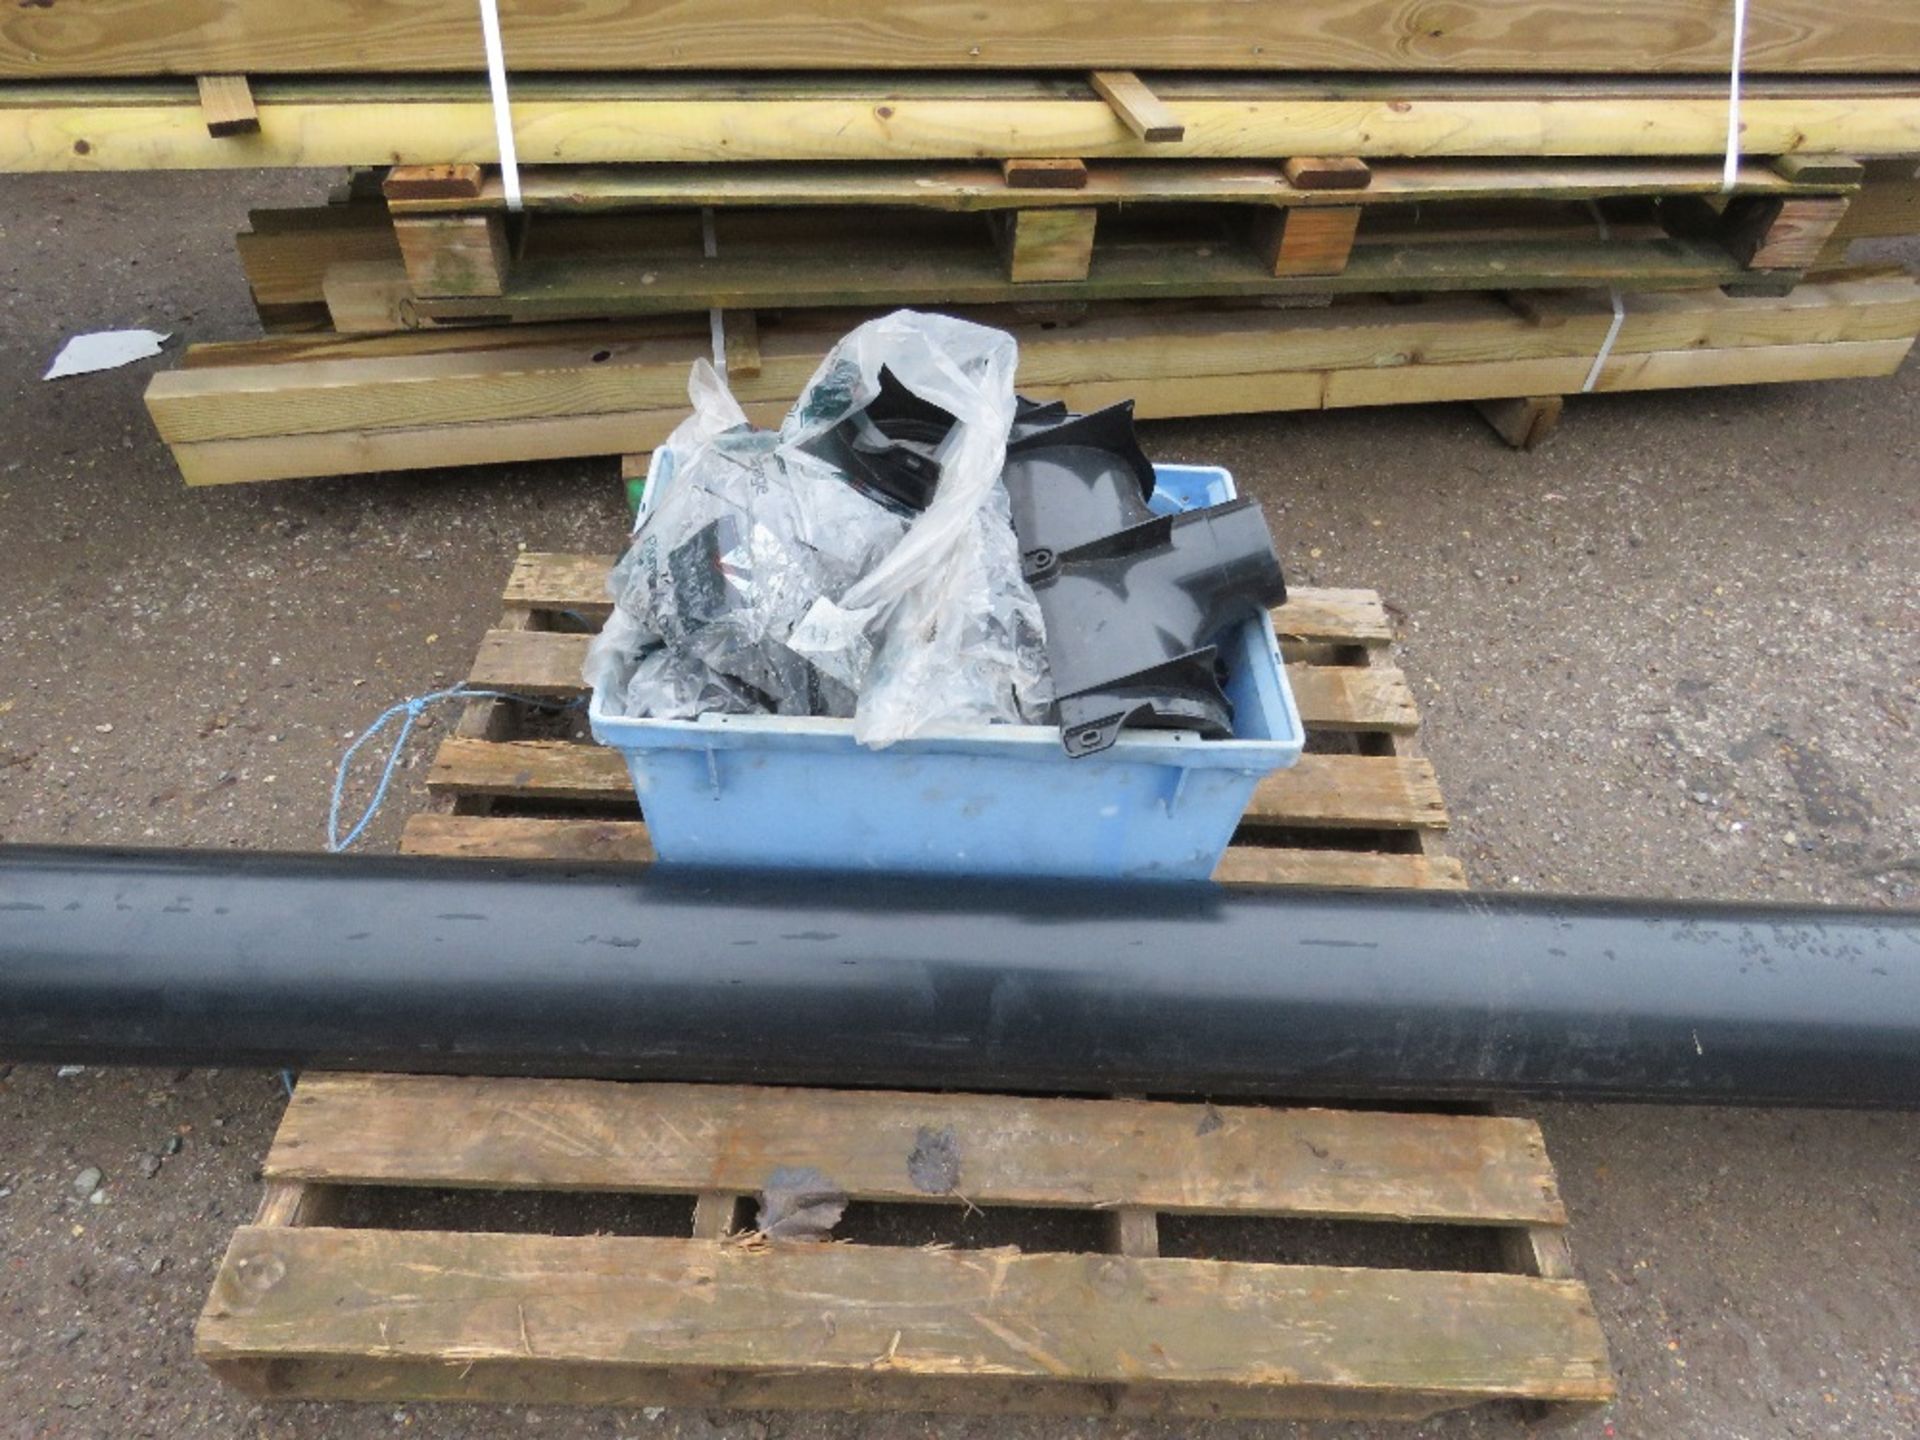 7 X LENGTHS OF LARGE FLOW PLASTIC GUTTER PLUS FITTINGS, UNUSED. 20CM WIDTH X 4M LENGTH APPROX. TH